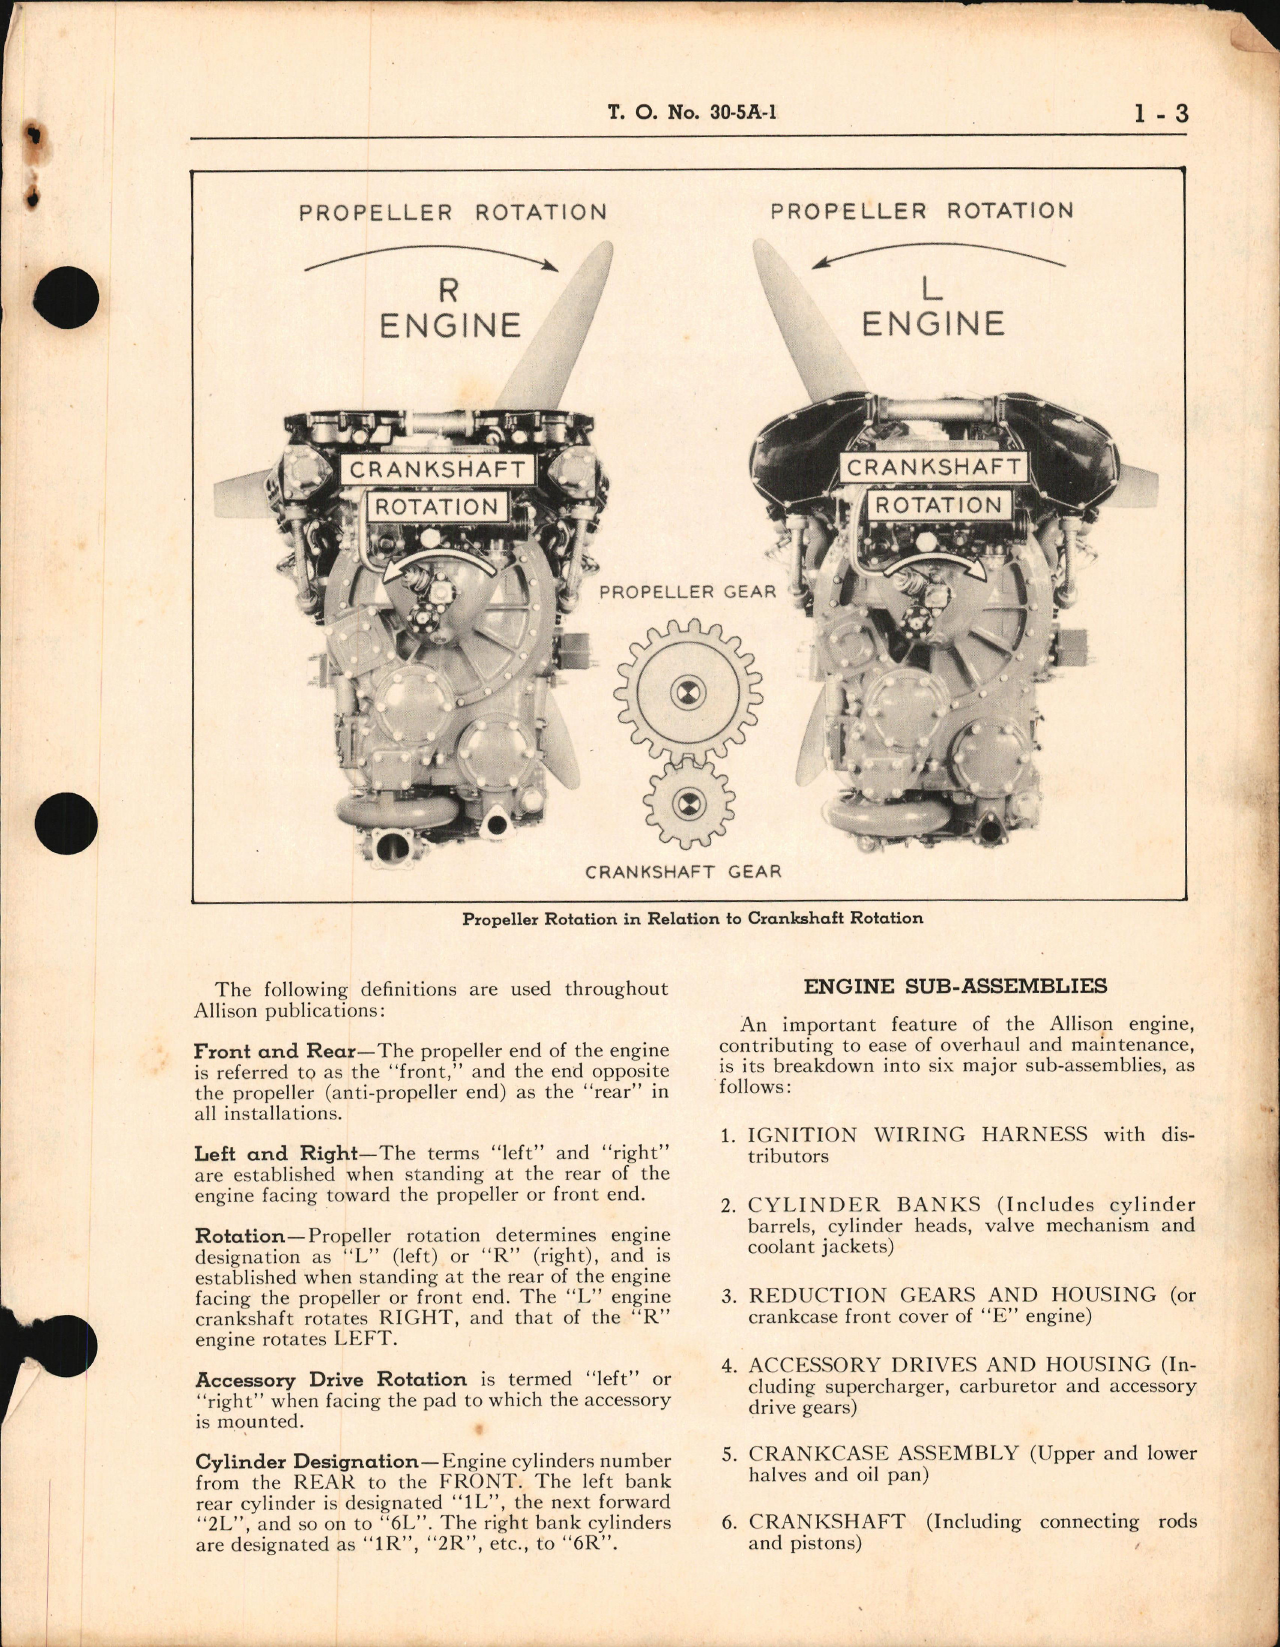 Sample page 7 from AirCorps Library document: Information Guide for Allison V-1710 E and F Engines